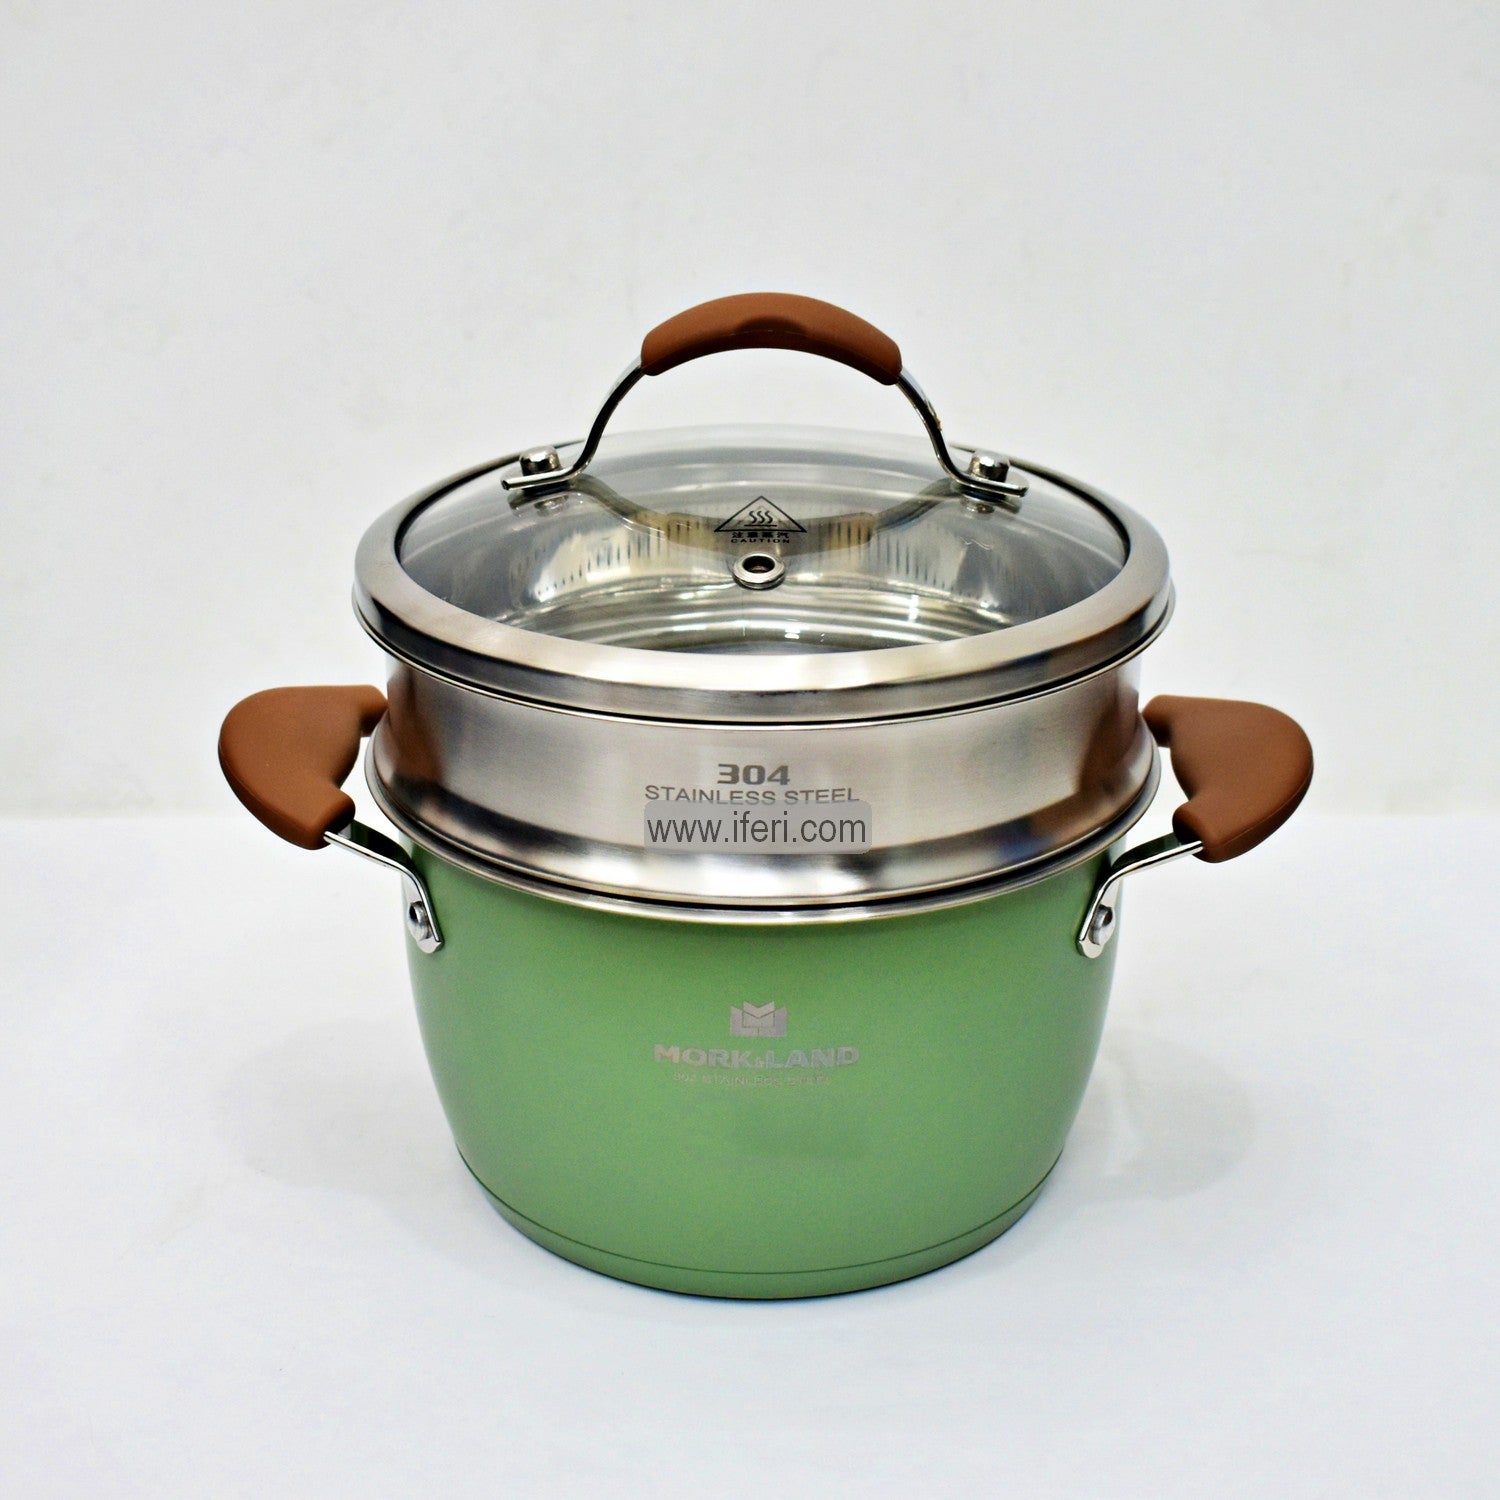 20cm Stainless Steel Cookware with Steamer RY06355